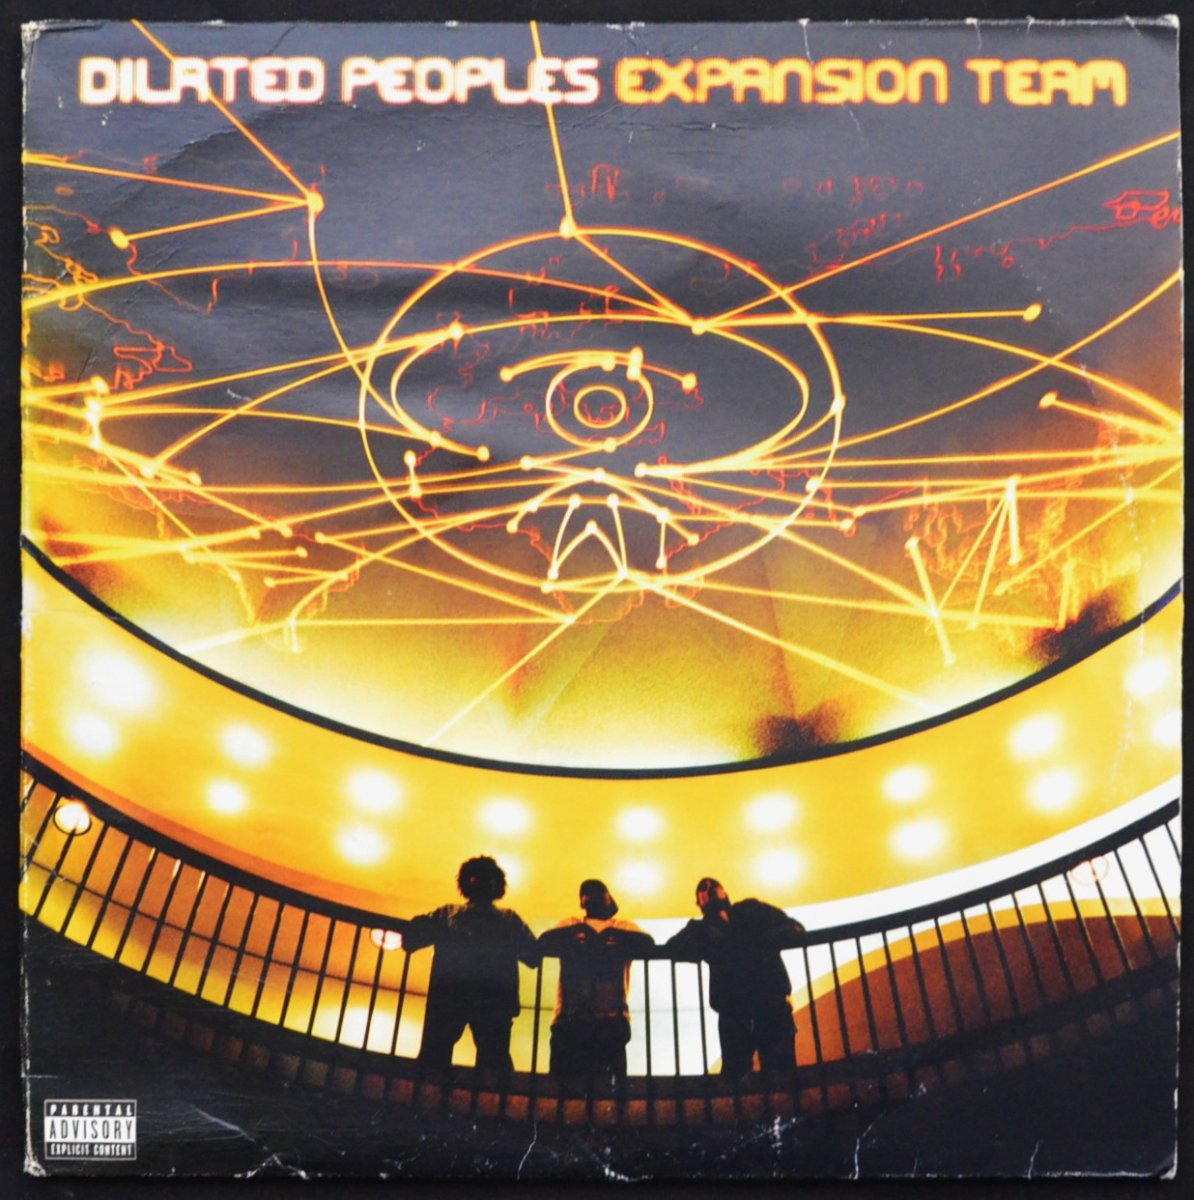 DILATED PEOPLES / EXPANSION TEAM (3LP) - HIP TANK RECORDS